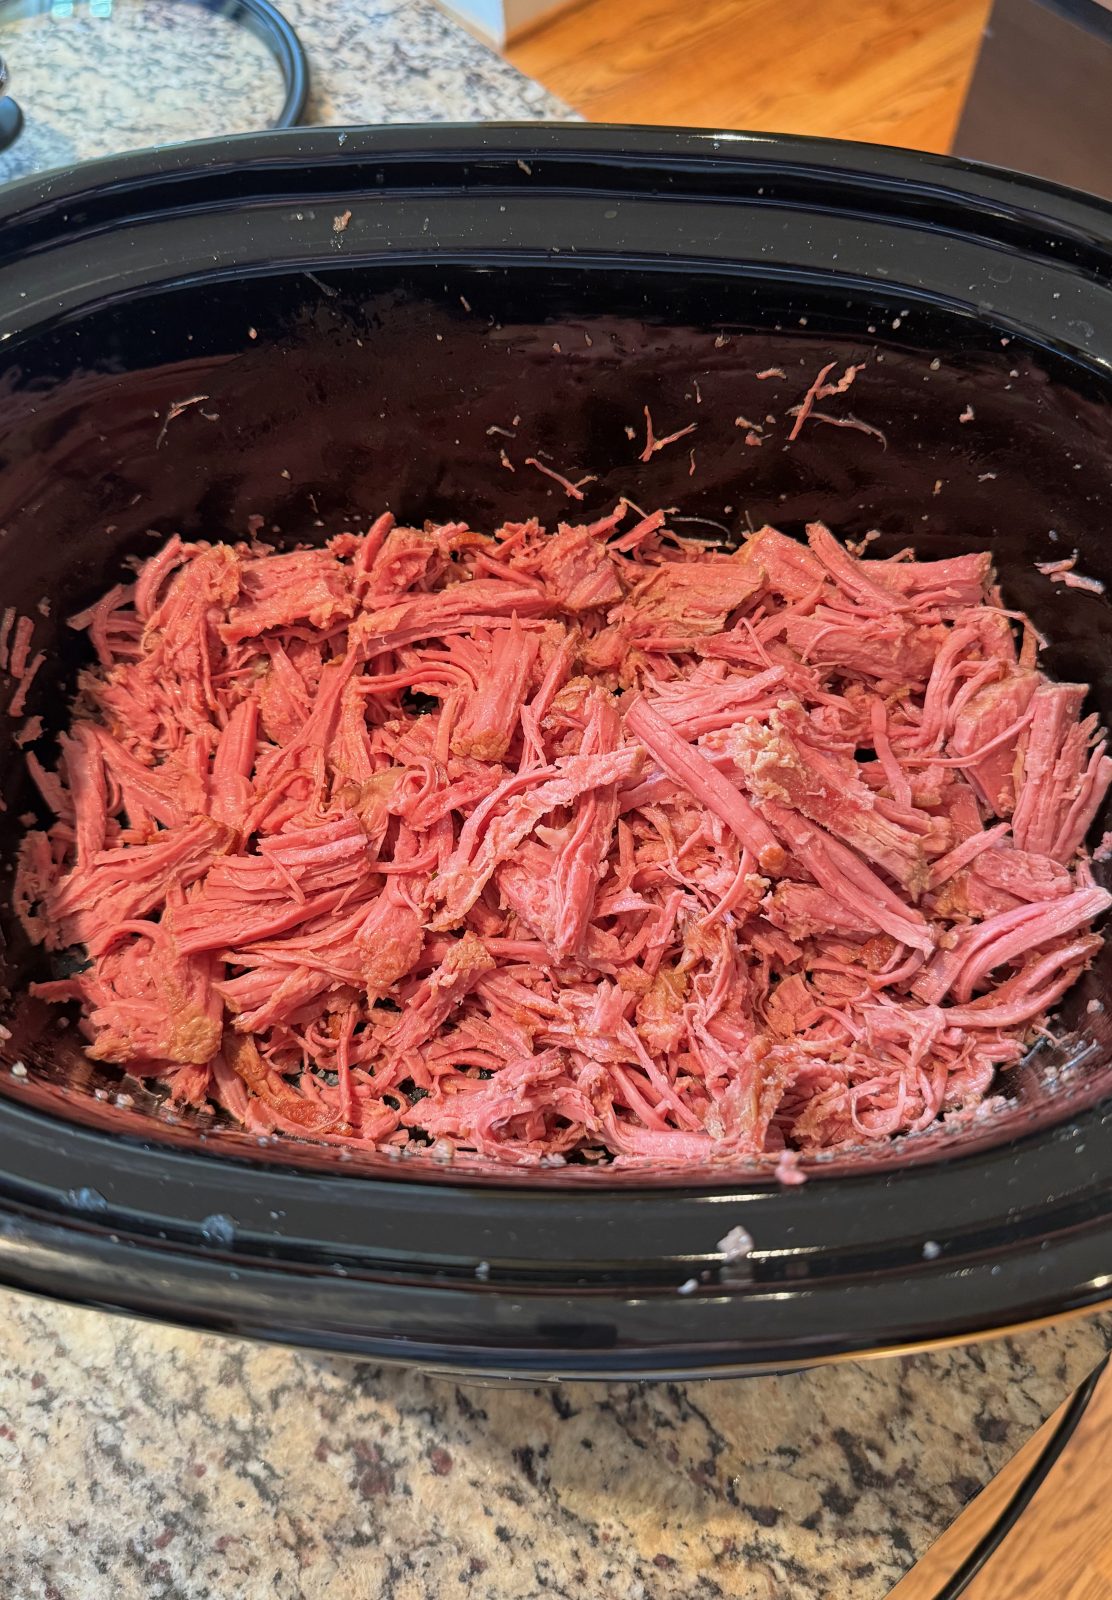 KitchenAid slow cooker with black insert on a granite countertop with shredded cooked corned beef preparing to make Slow Cooker Reuben Dip